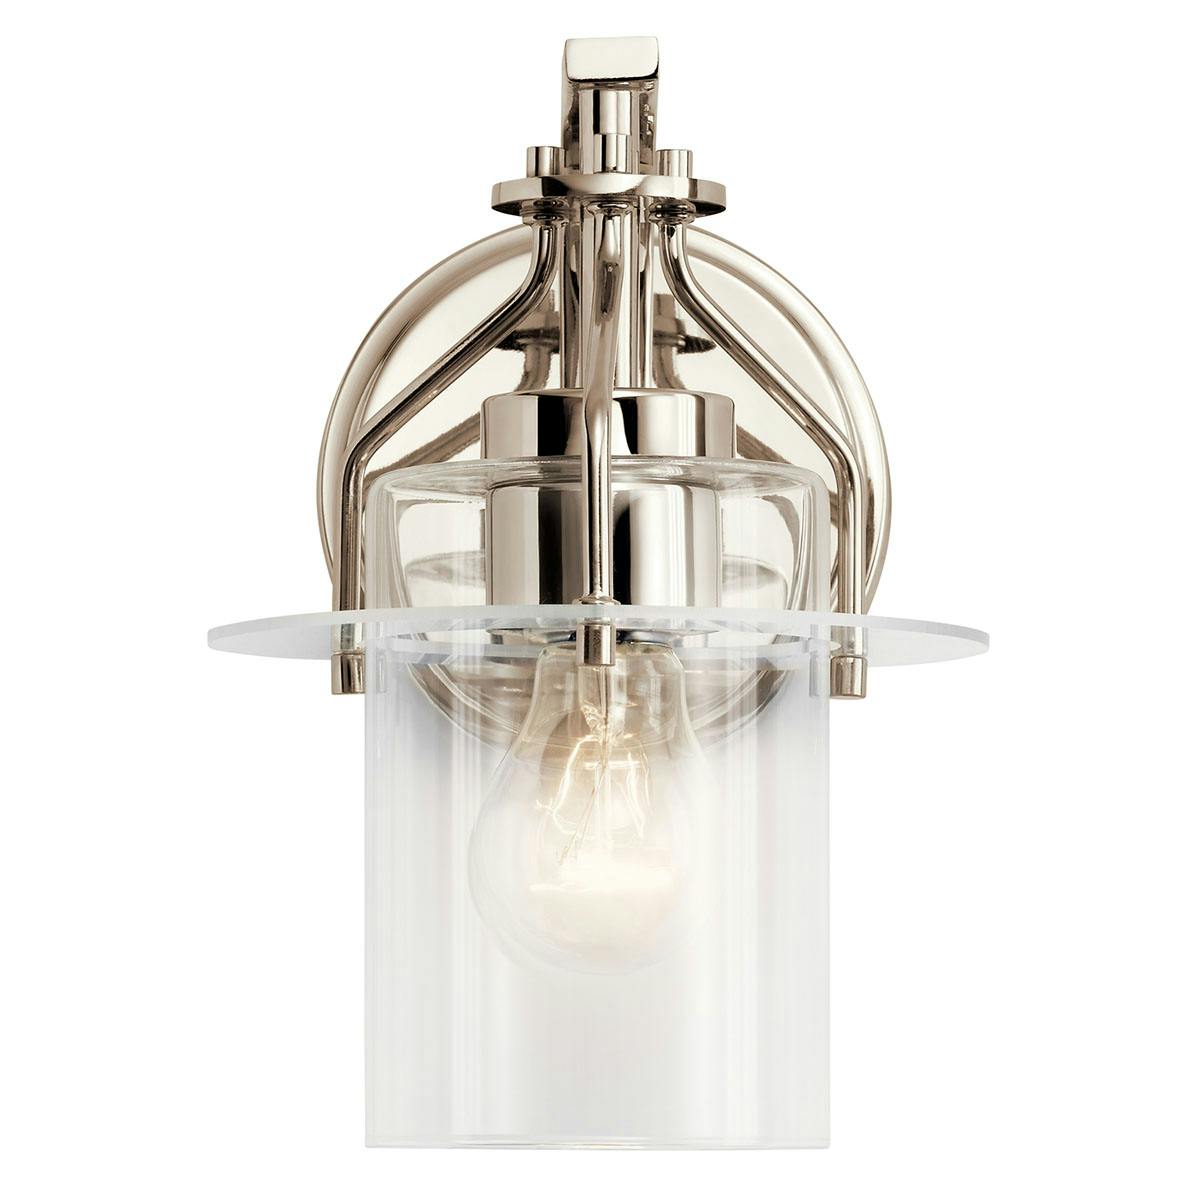 Front view of the Everett 1 Light Sconce in Nickel on a white background